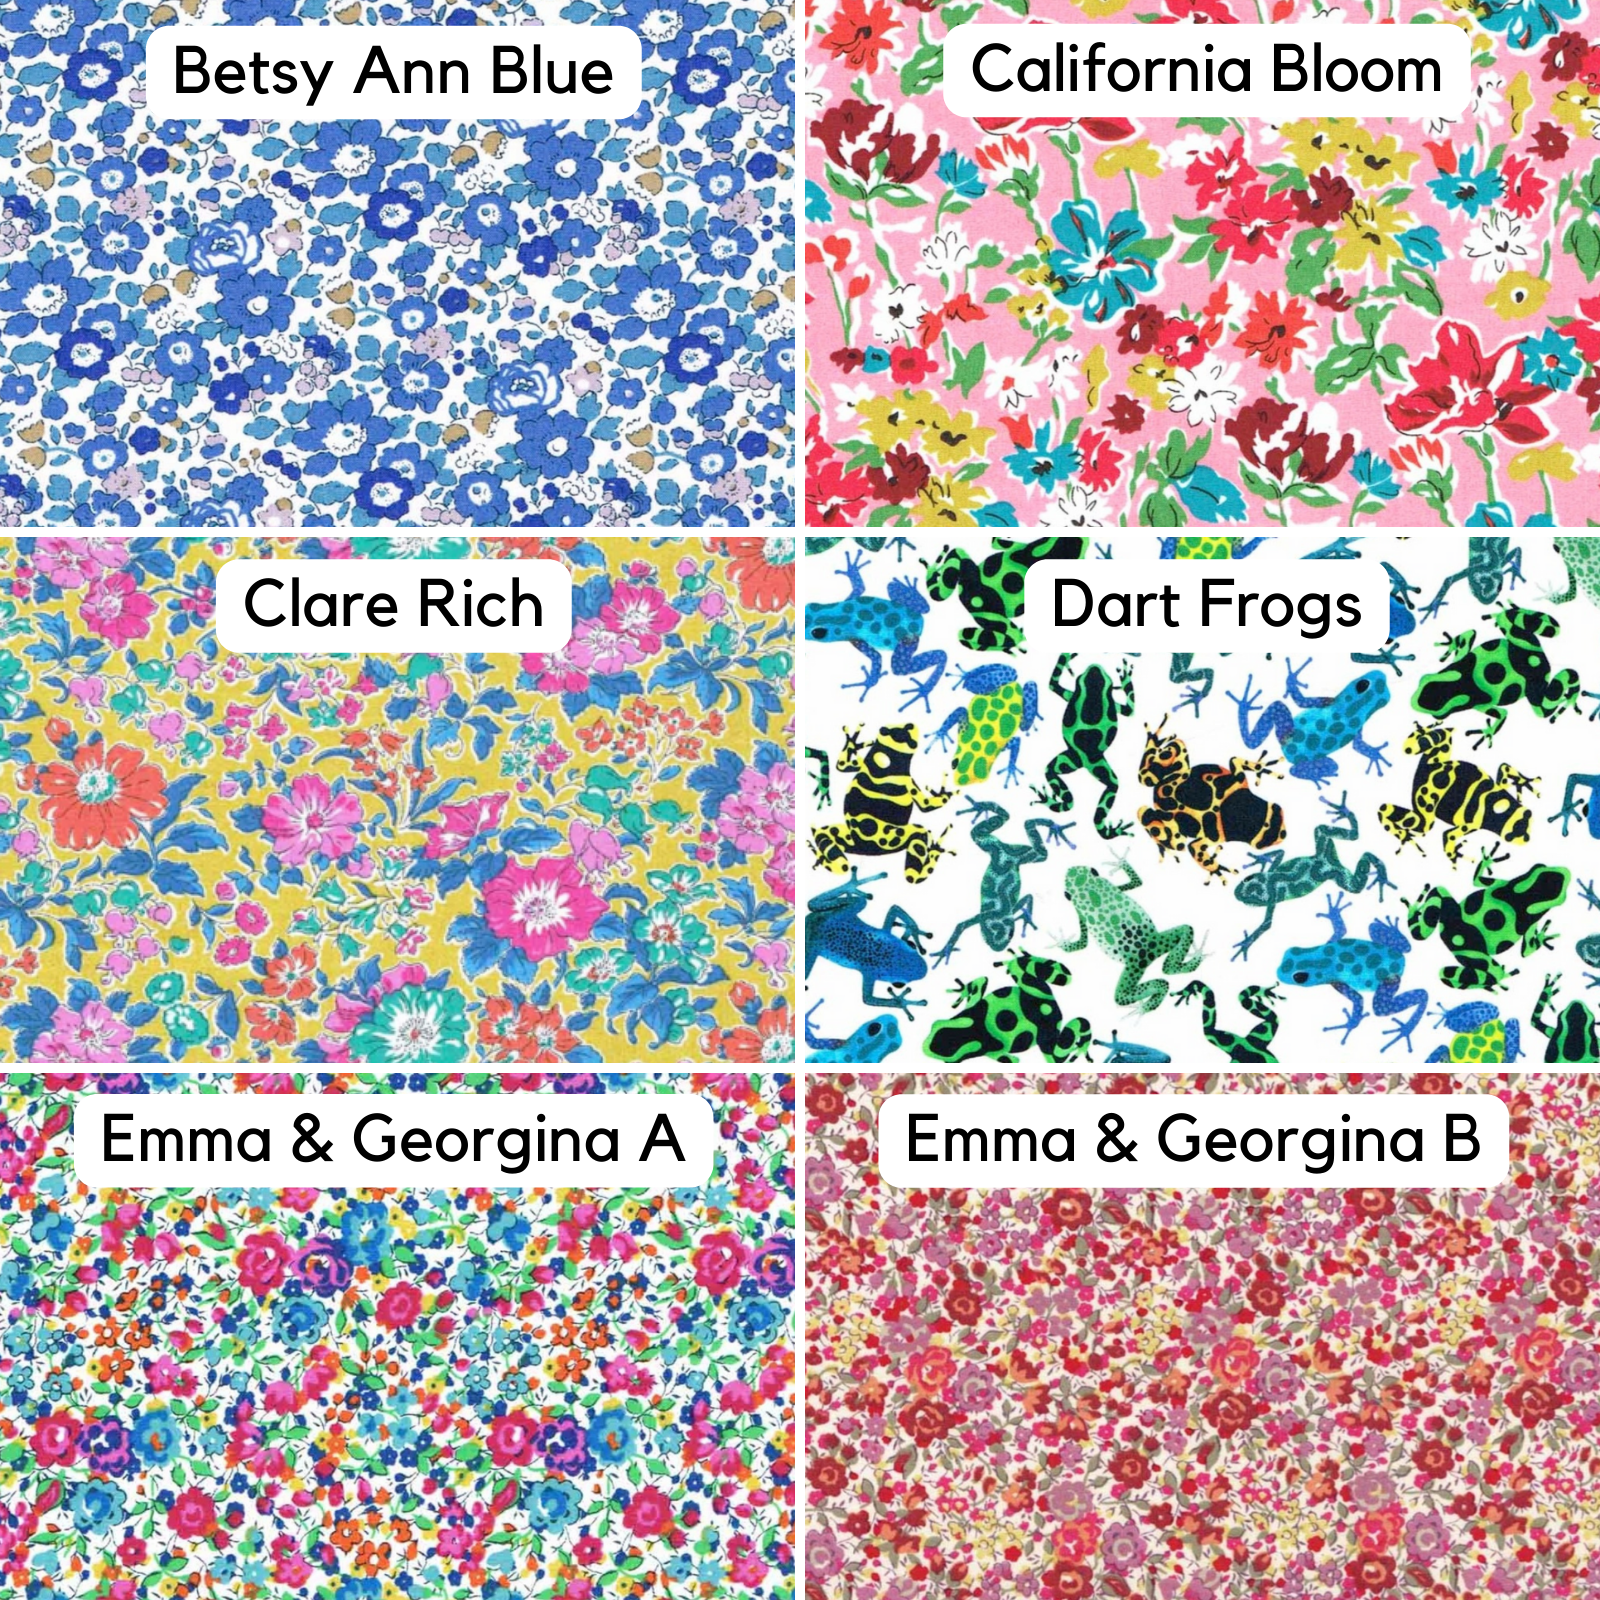 Image of 6 Liberty prints - Betsy Ann Blue, California Bloom, Clare Rich, Dart Frogs, Emma & Georgina A and Emma & Georgina B which are all fabric options for an appliqued initial on our personalised nursery / school bags